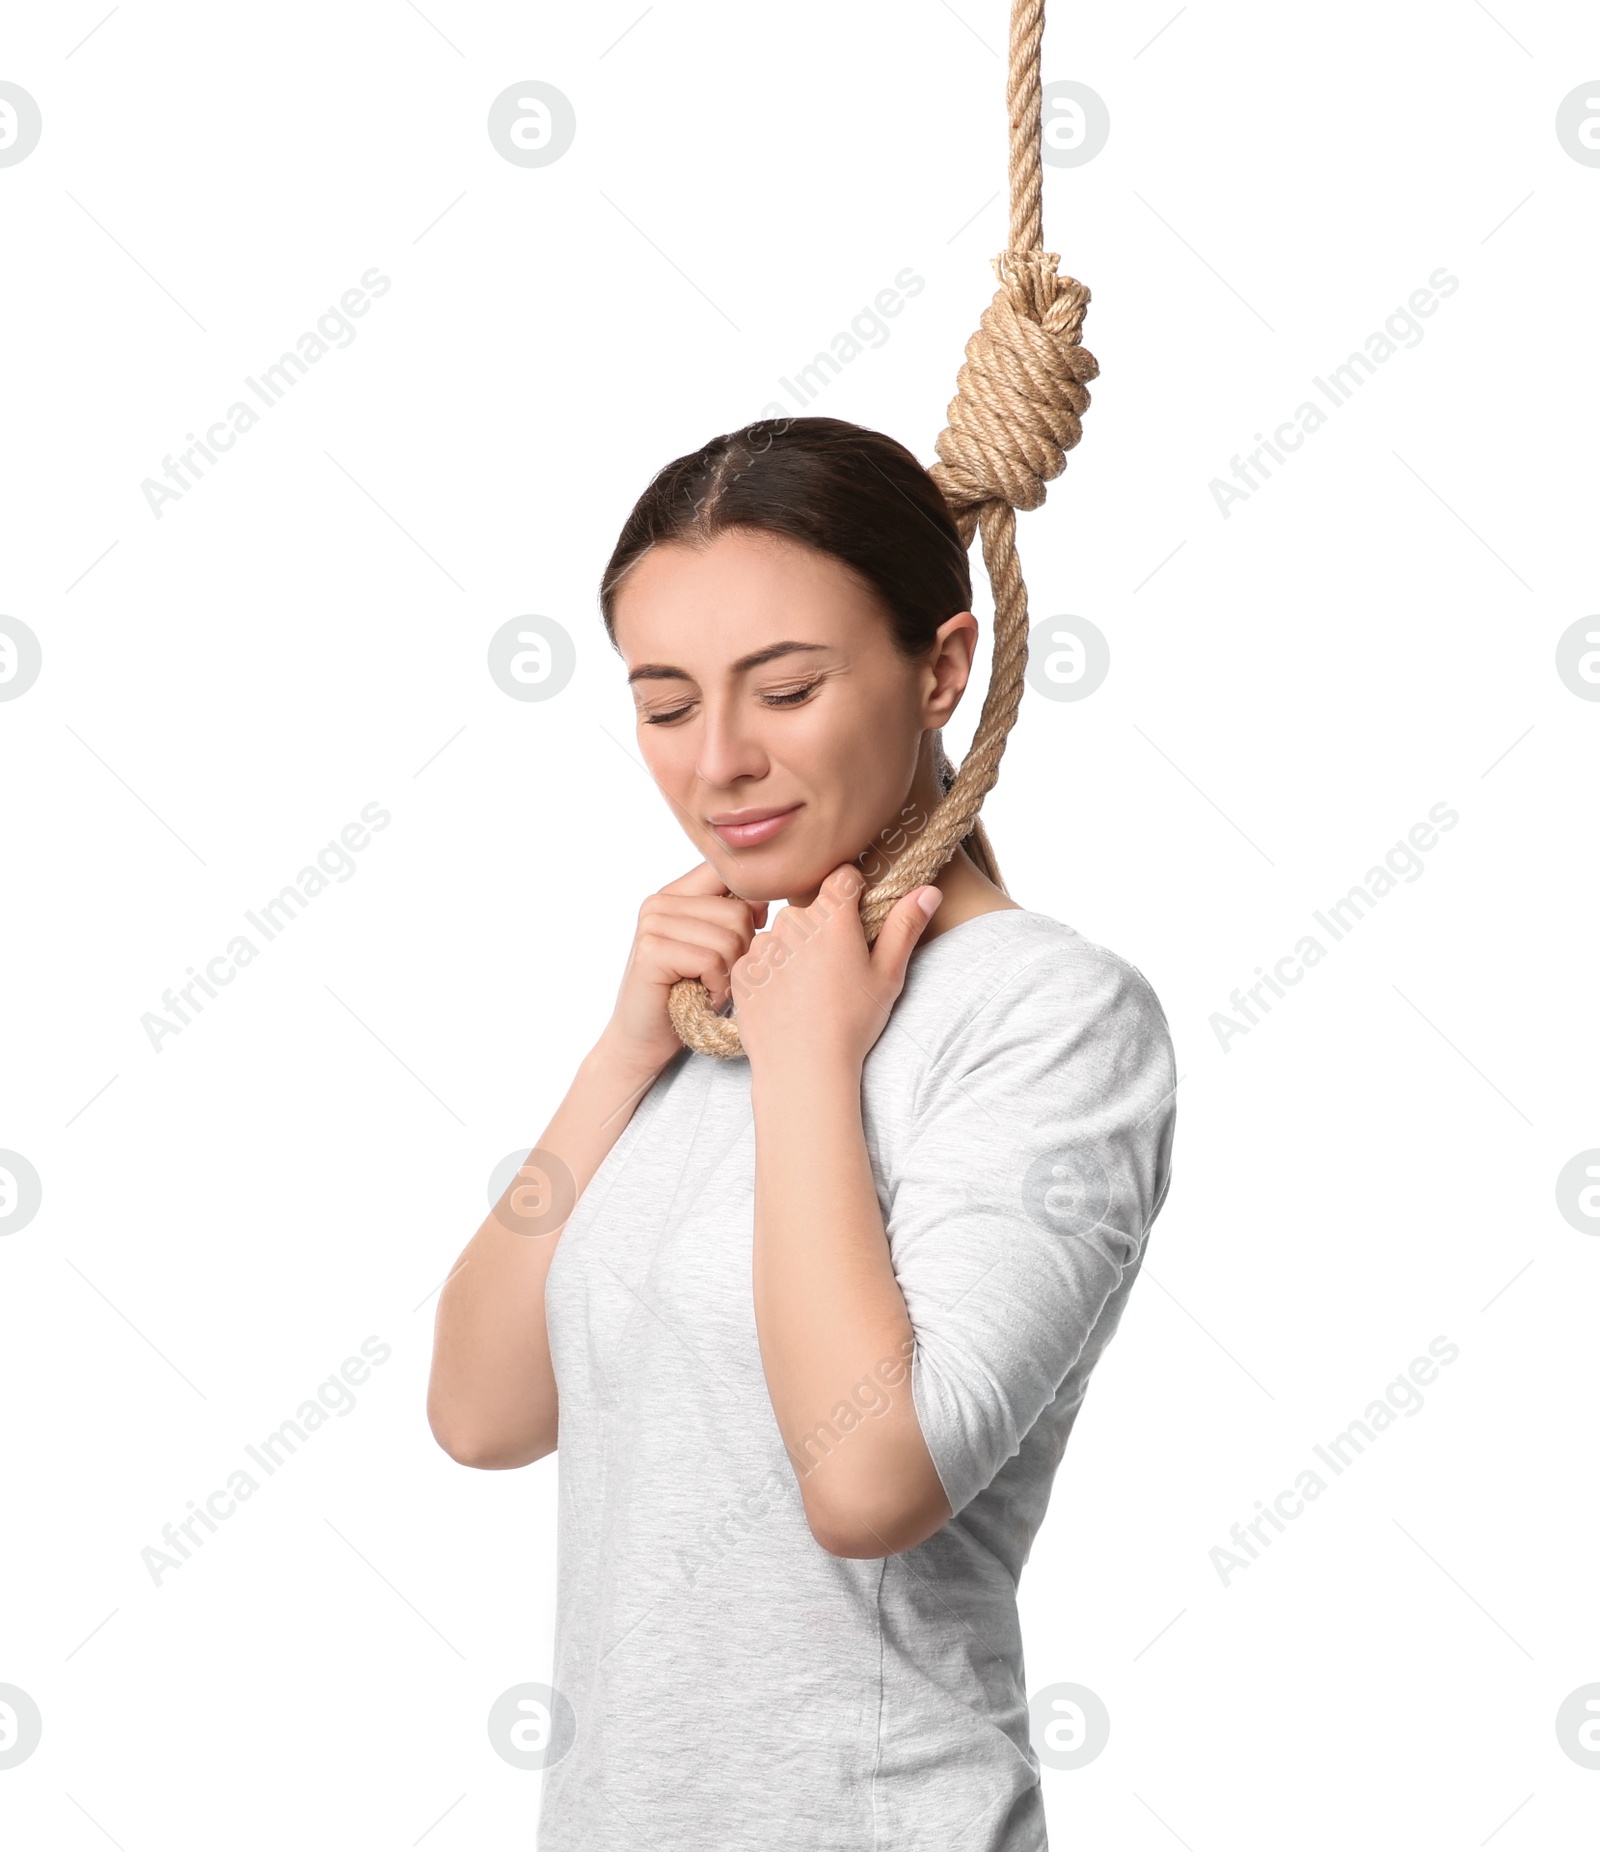 Photo of Depressed woman with rope noose on neck against white background